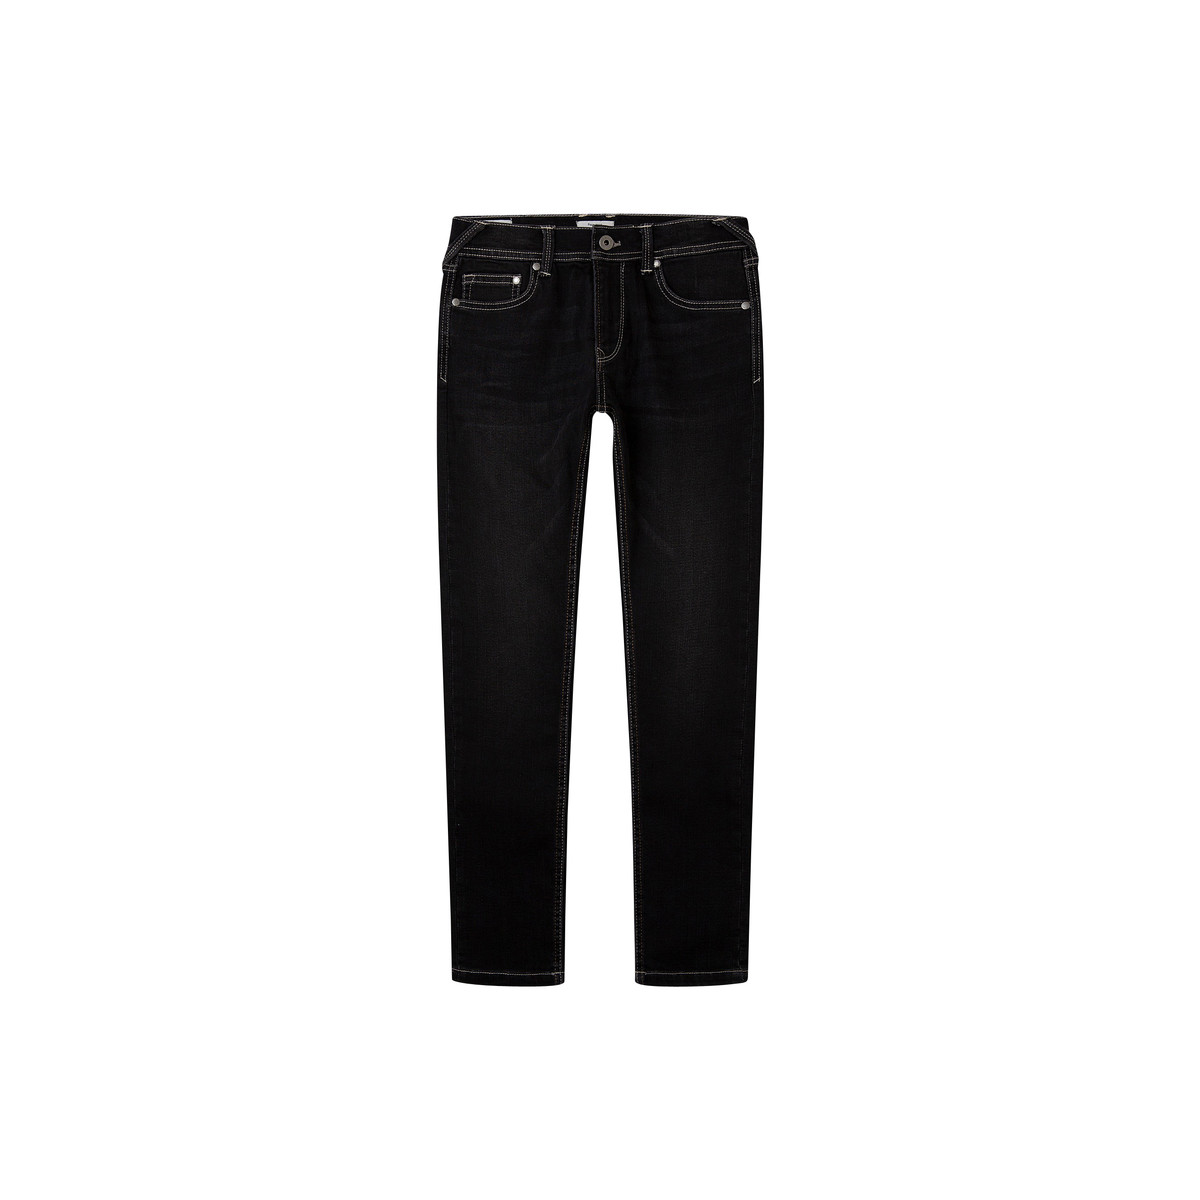 Pepe jeans  Skinny jeans Pepe jeans FINLY